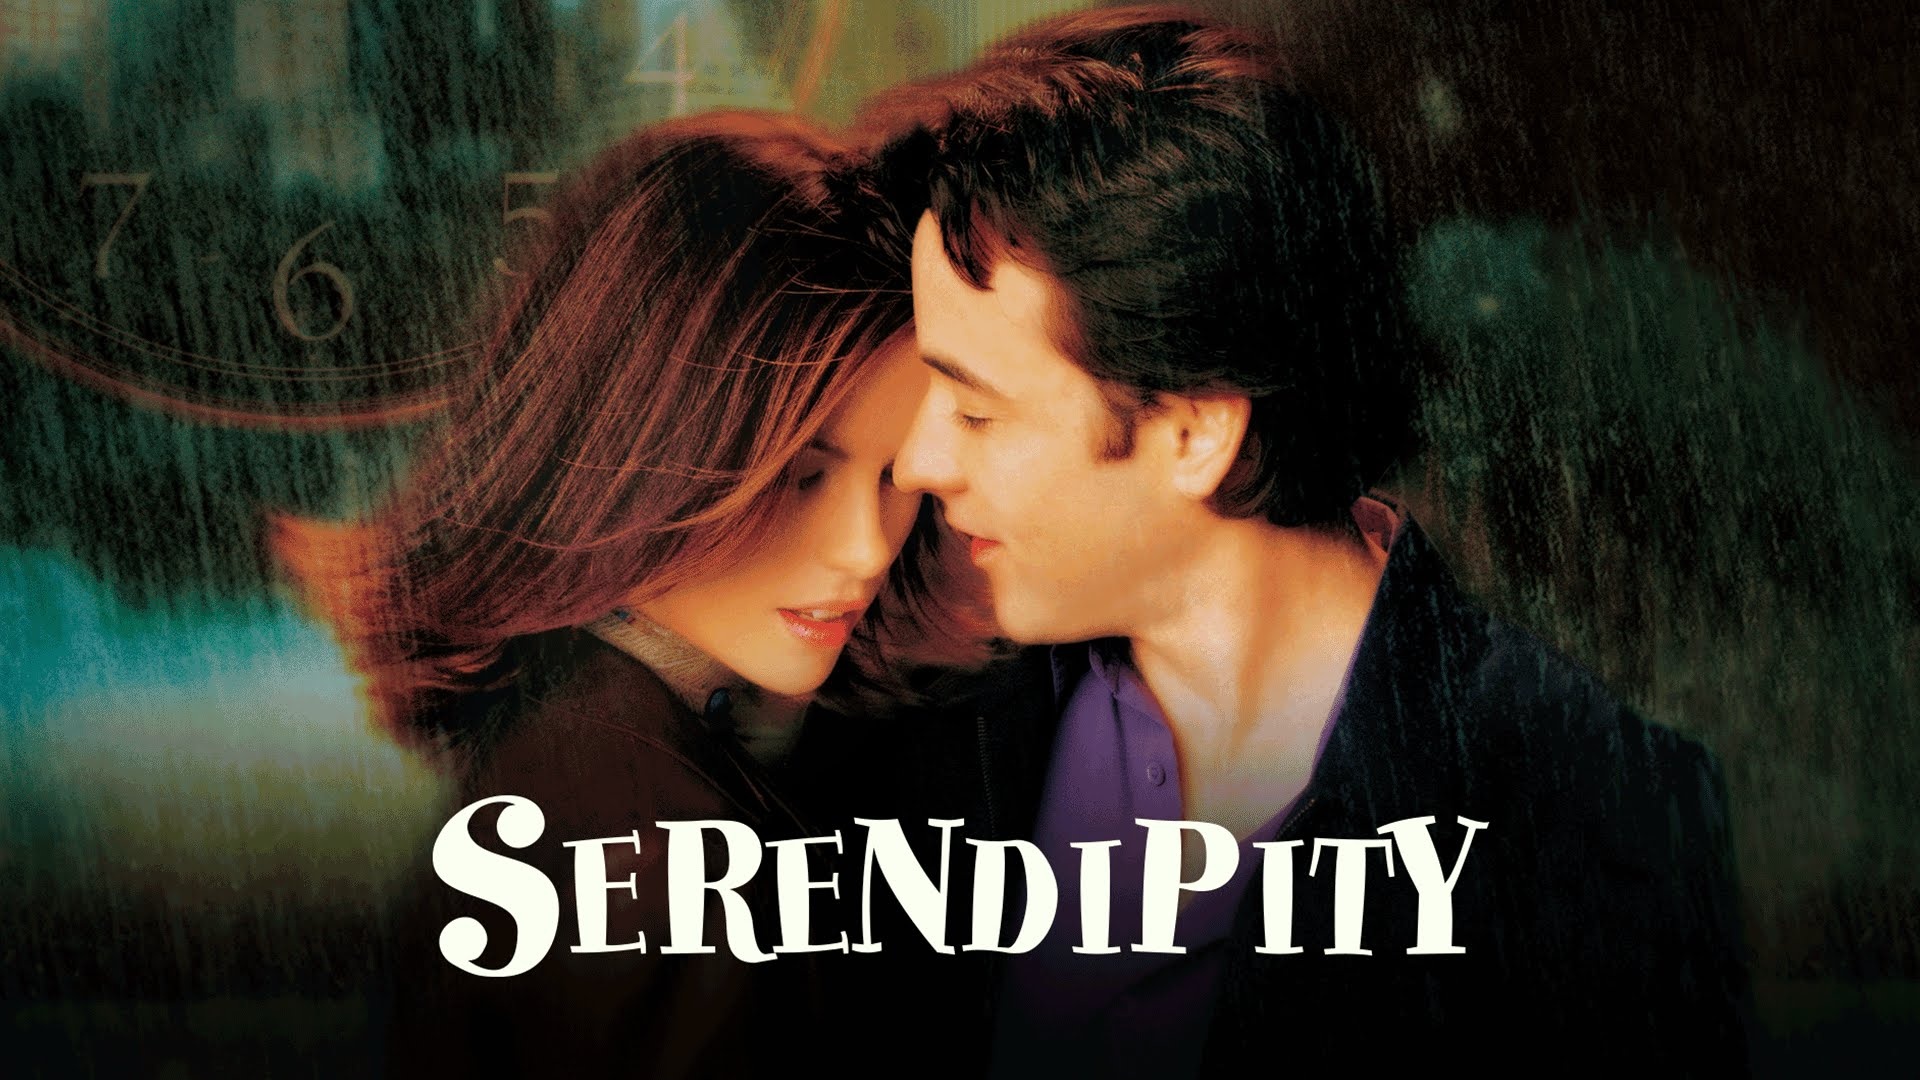 Serendipity (Movie): American romantic comedy film directed by Peter Chelsom. 1920x1080 Full HD Wallpaper.